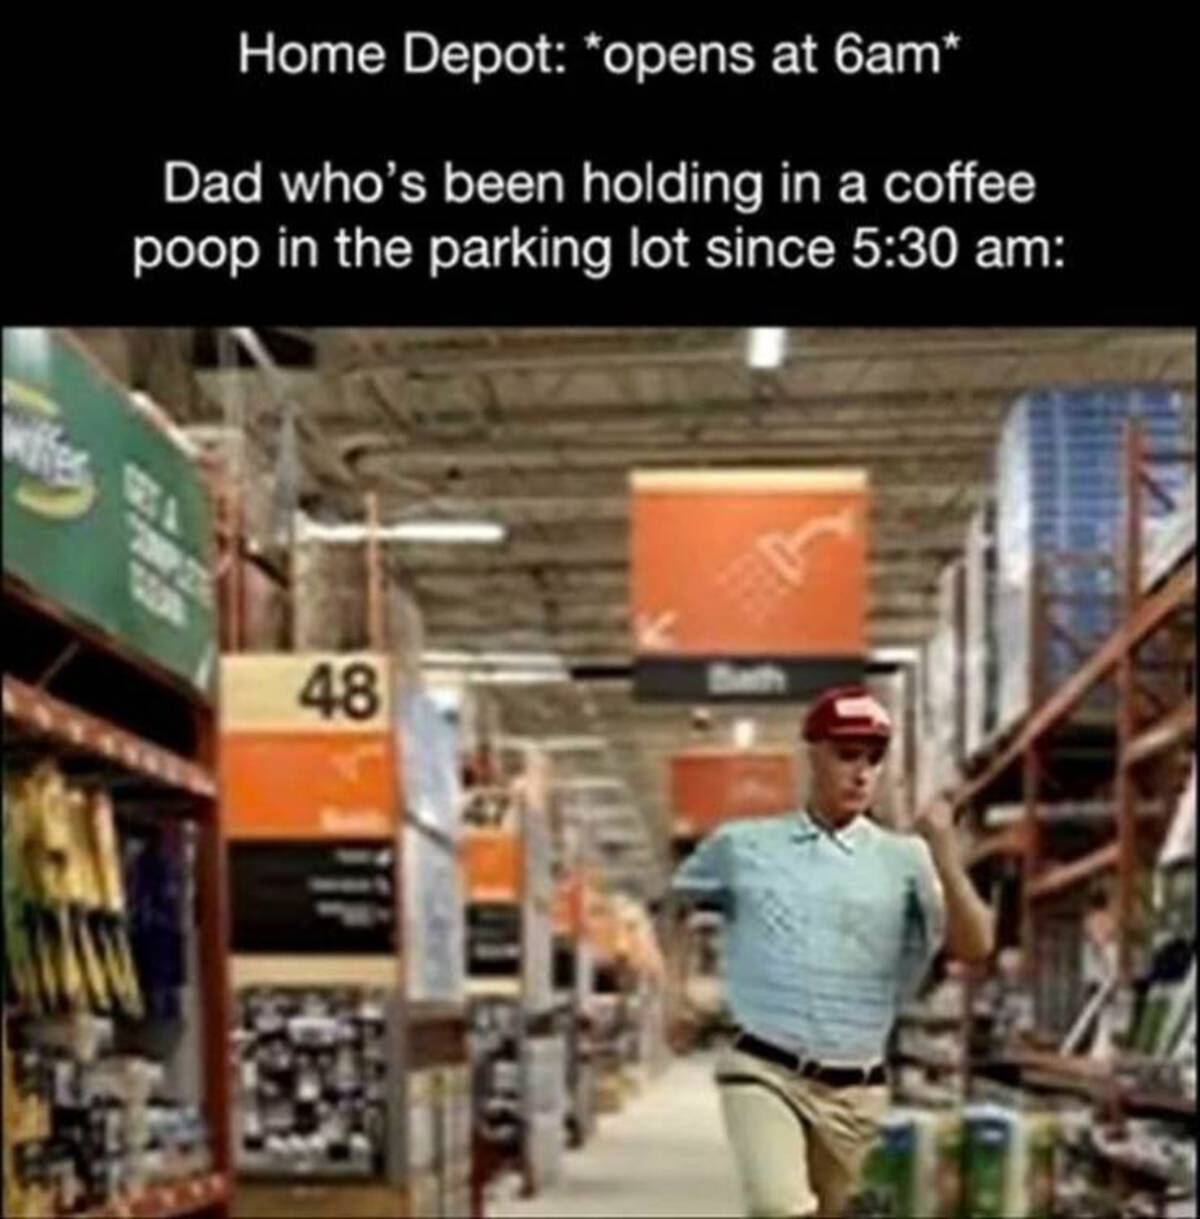 inventory - Home Depot opens at 6am Dad who's been holding in a coffee poop in the parking lot since 48 ge